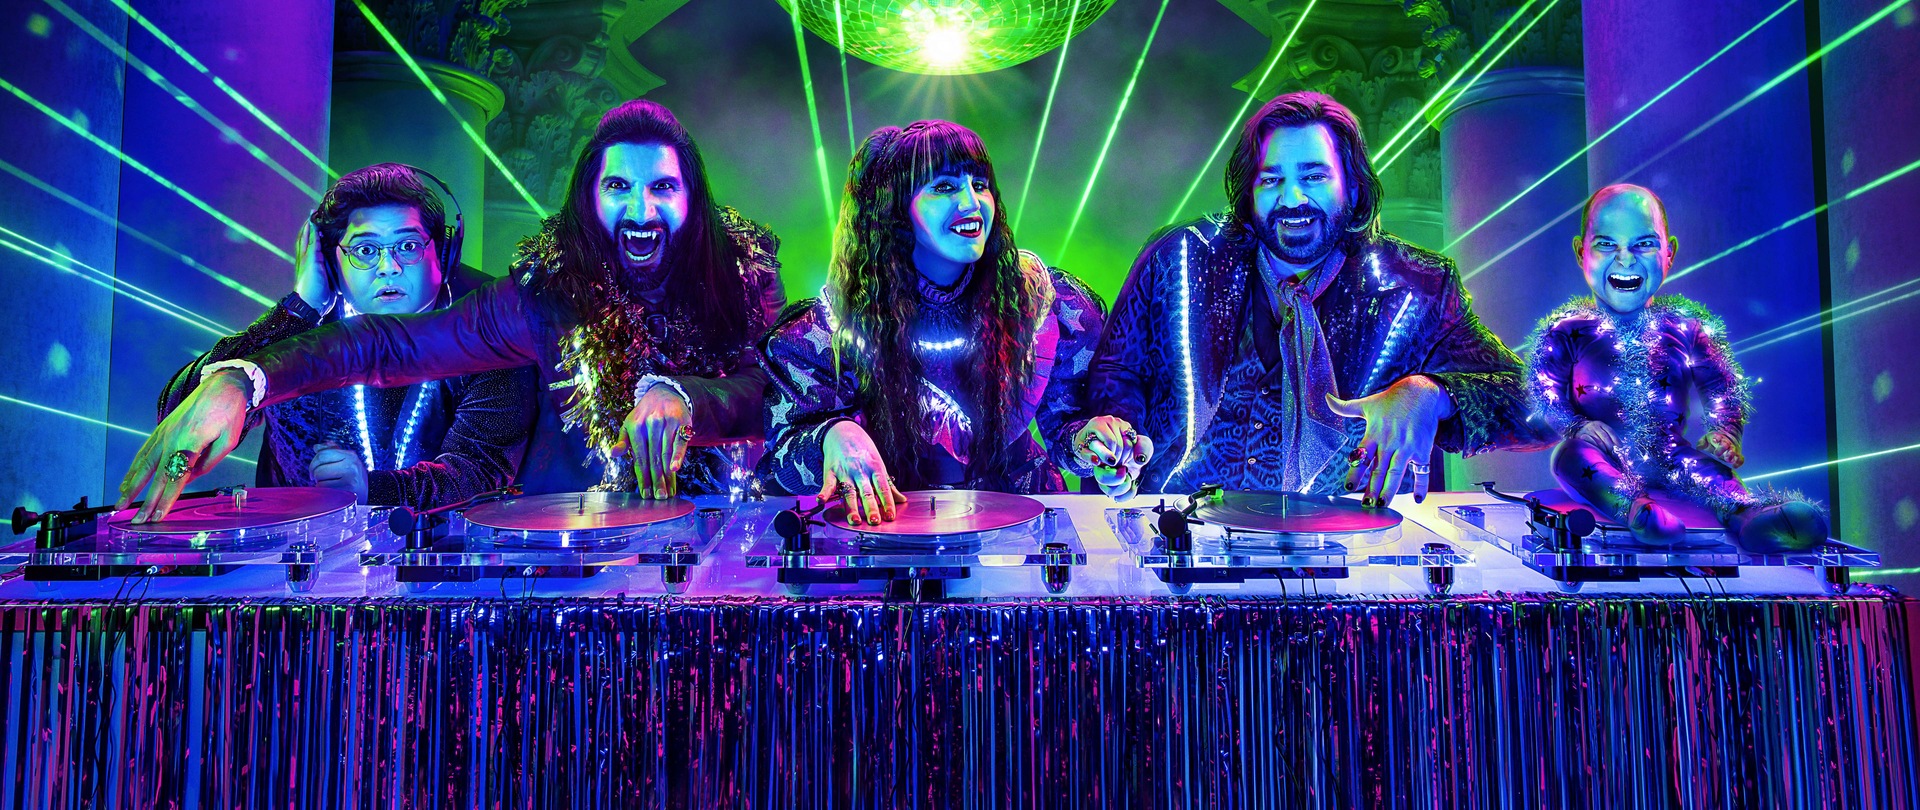 What We Do in the Shadows cast djing on a turn table with green lasers in purple effect